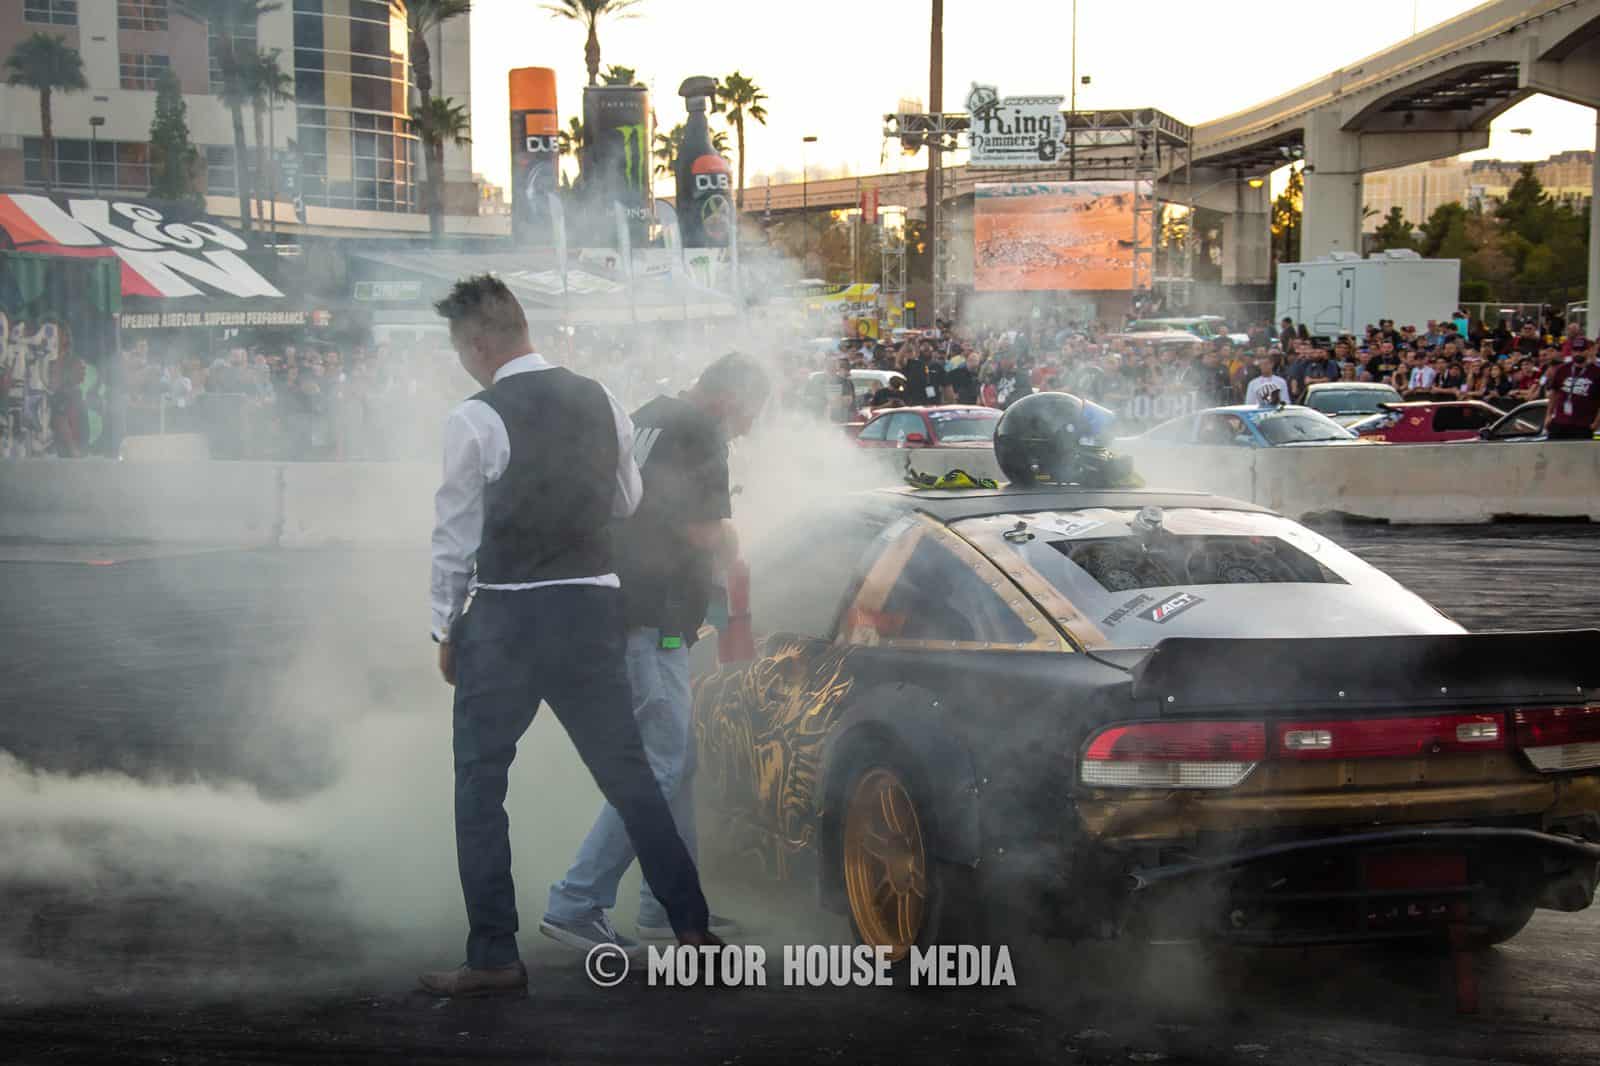 Fire being extinguished on Spike Chen's Drift car at Hoonigan